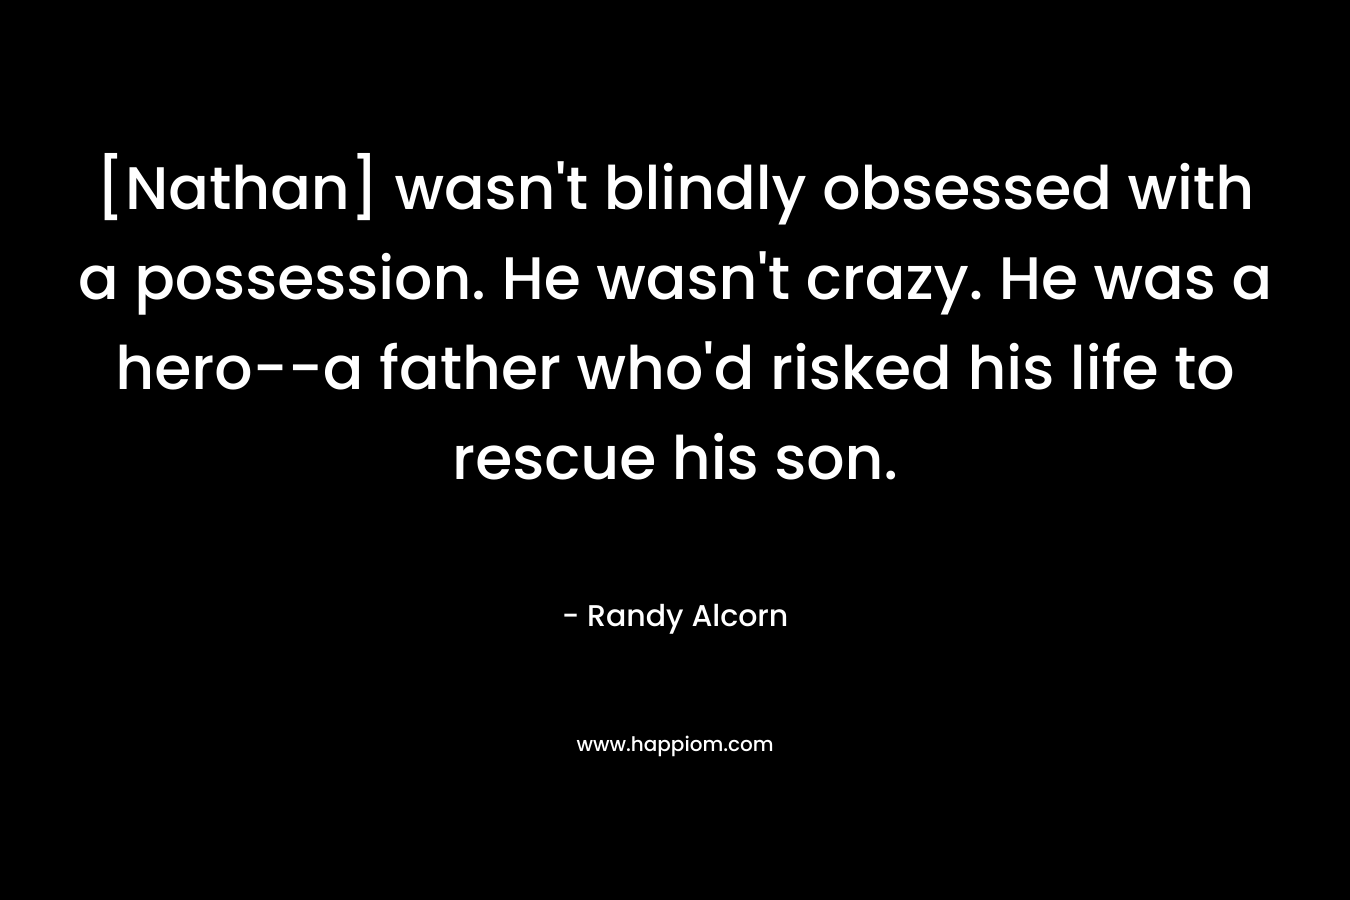 [Nathan] wasn't blindly obsessed with a possession. He wasn't crazy. He was a hero--a father who'd risked his life to rescue his son.